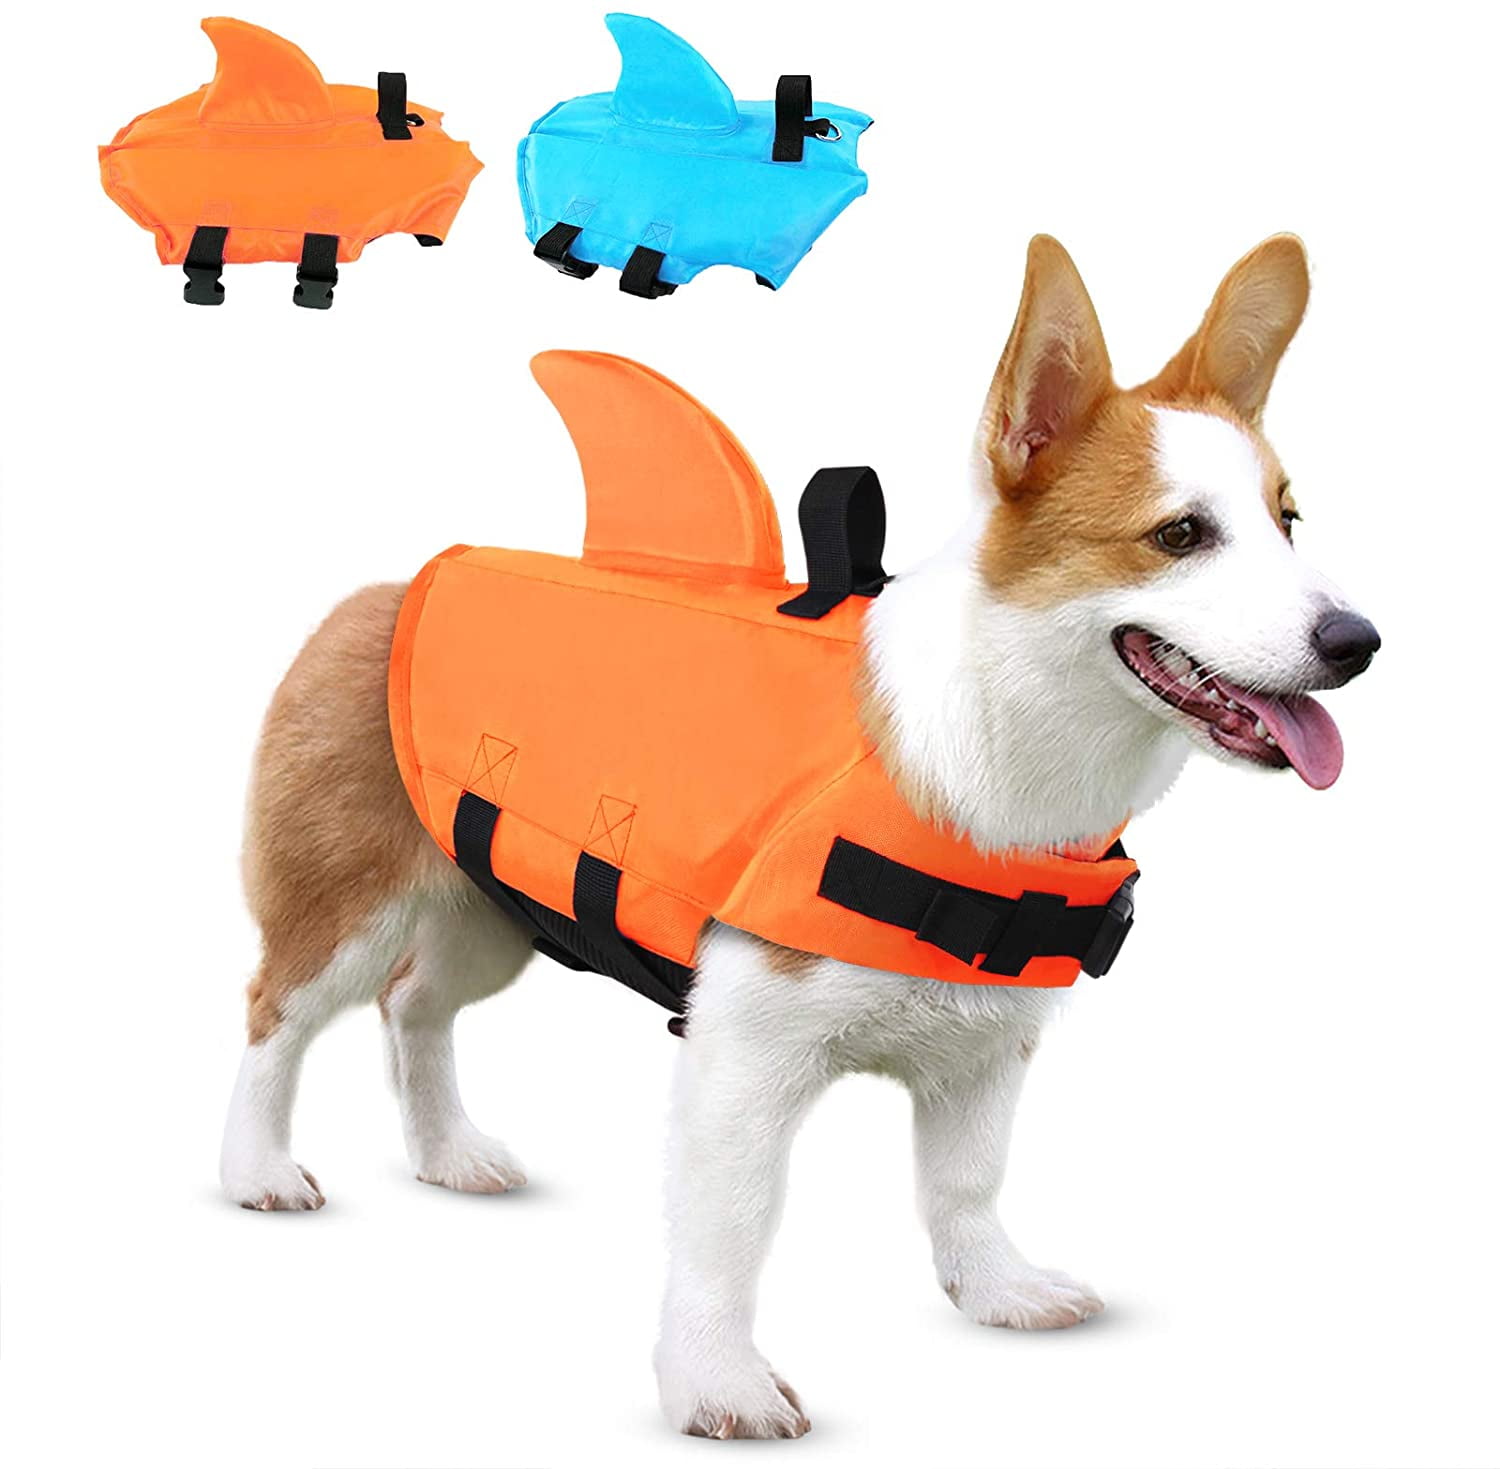 Dogs Safety Vests Swimming Vest for Swimming Boating Flotation Vest Life Jacket for Large Safety Swimsuit Preserver with Rescue Handle Ripstop Dog Safety Swimsuit with Reflective Stripes